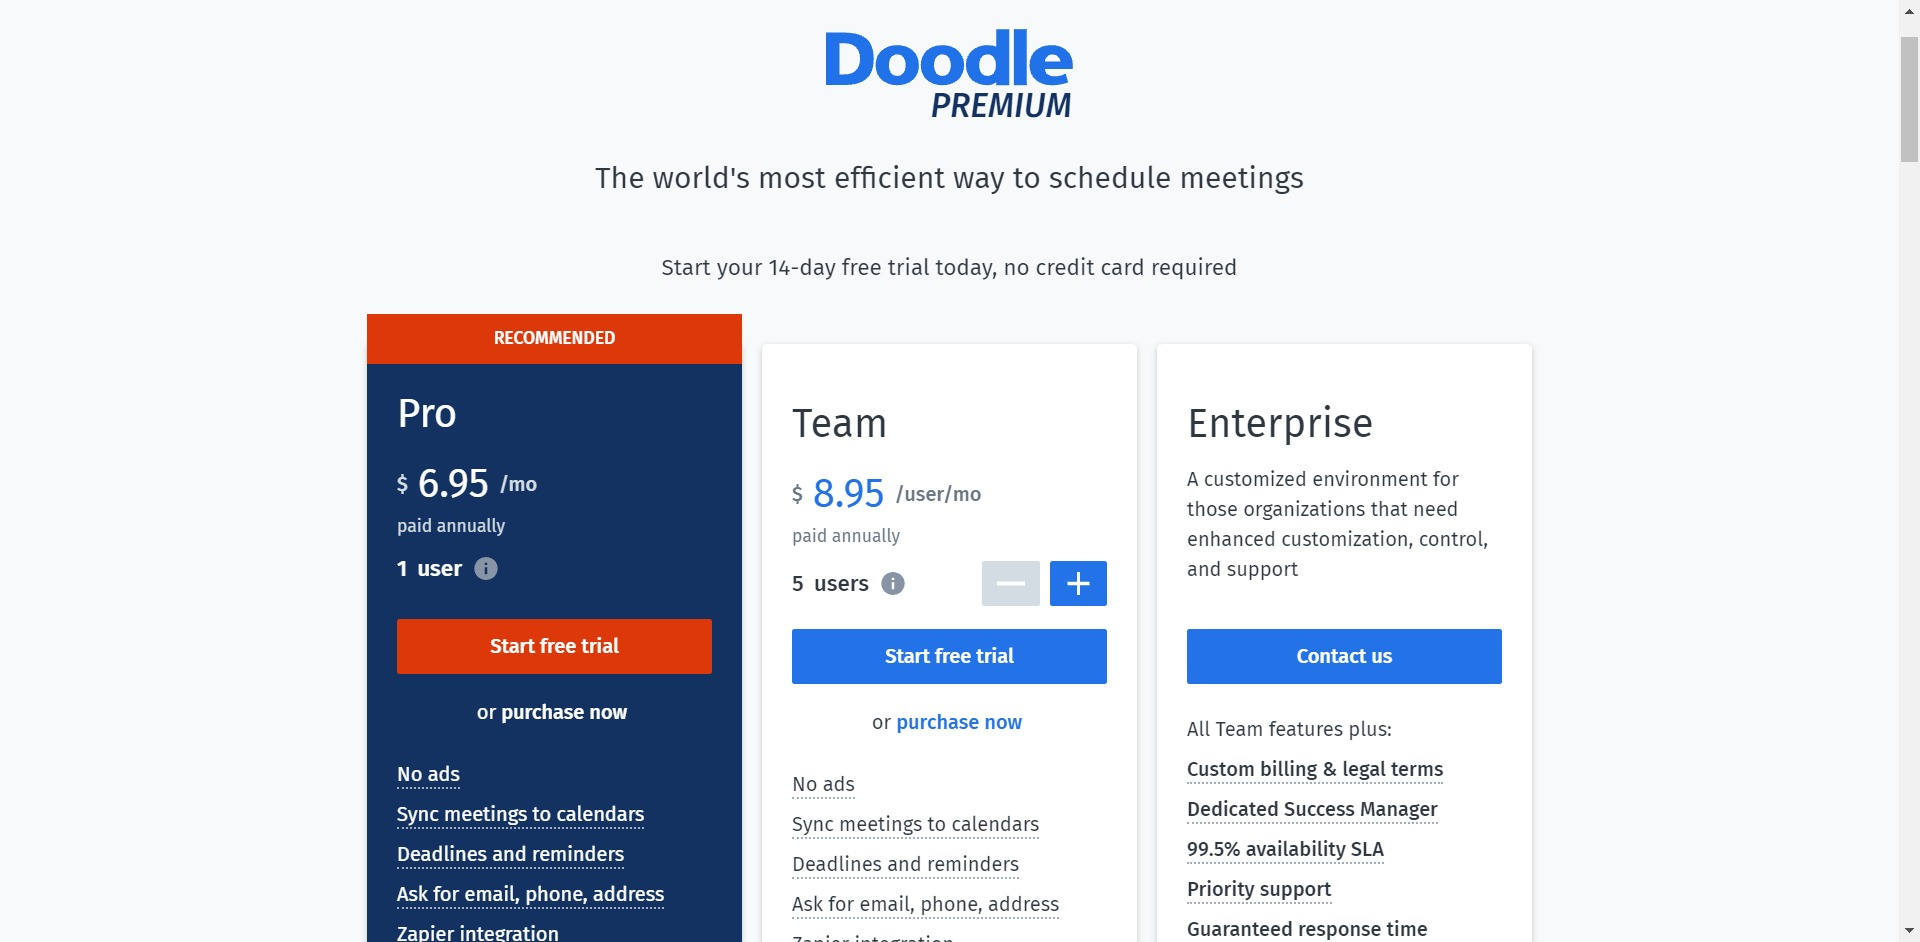 Doodle pricing and plans